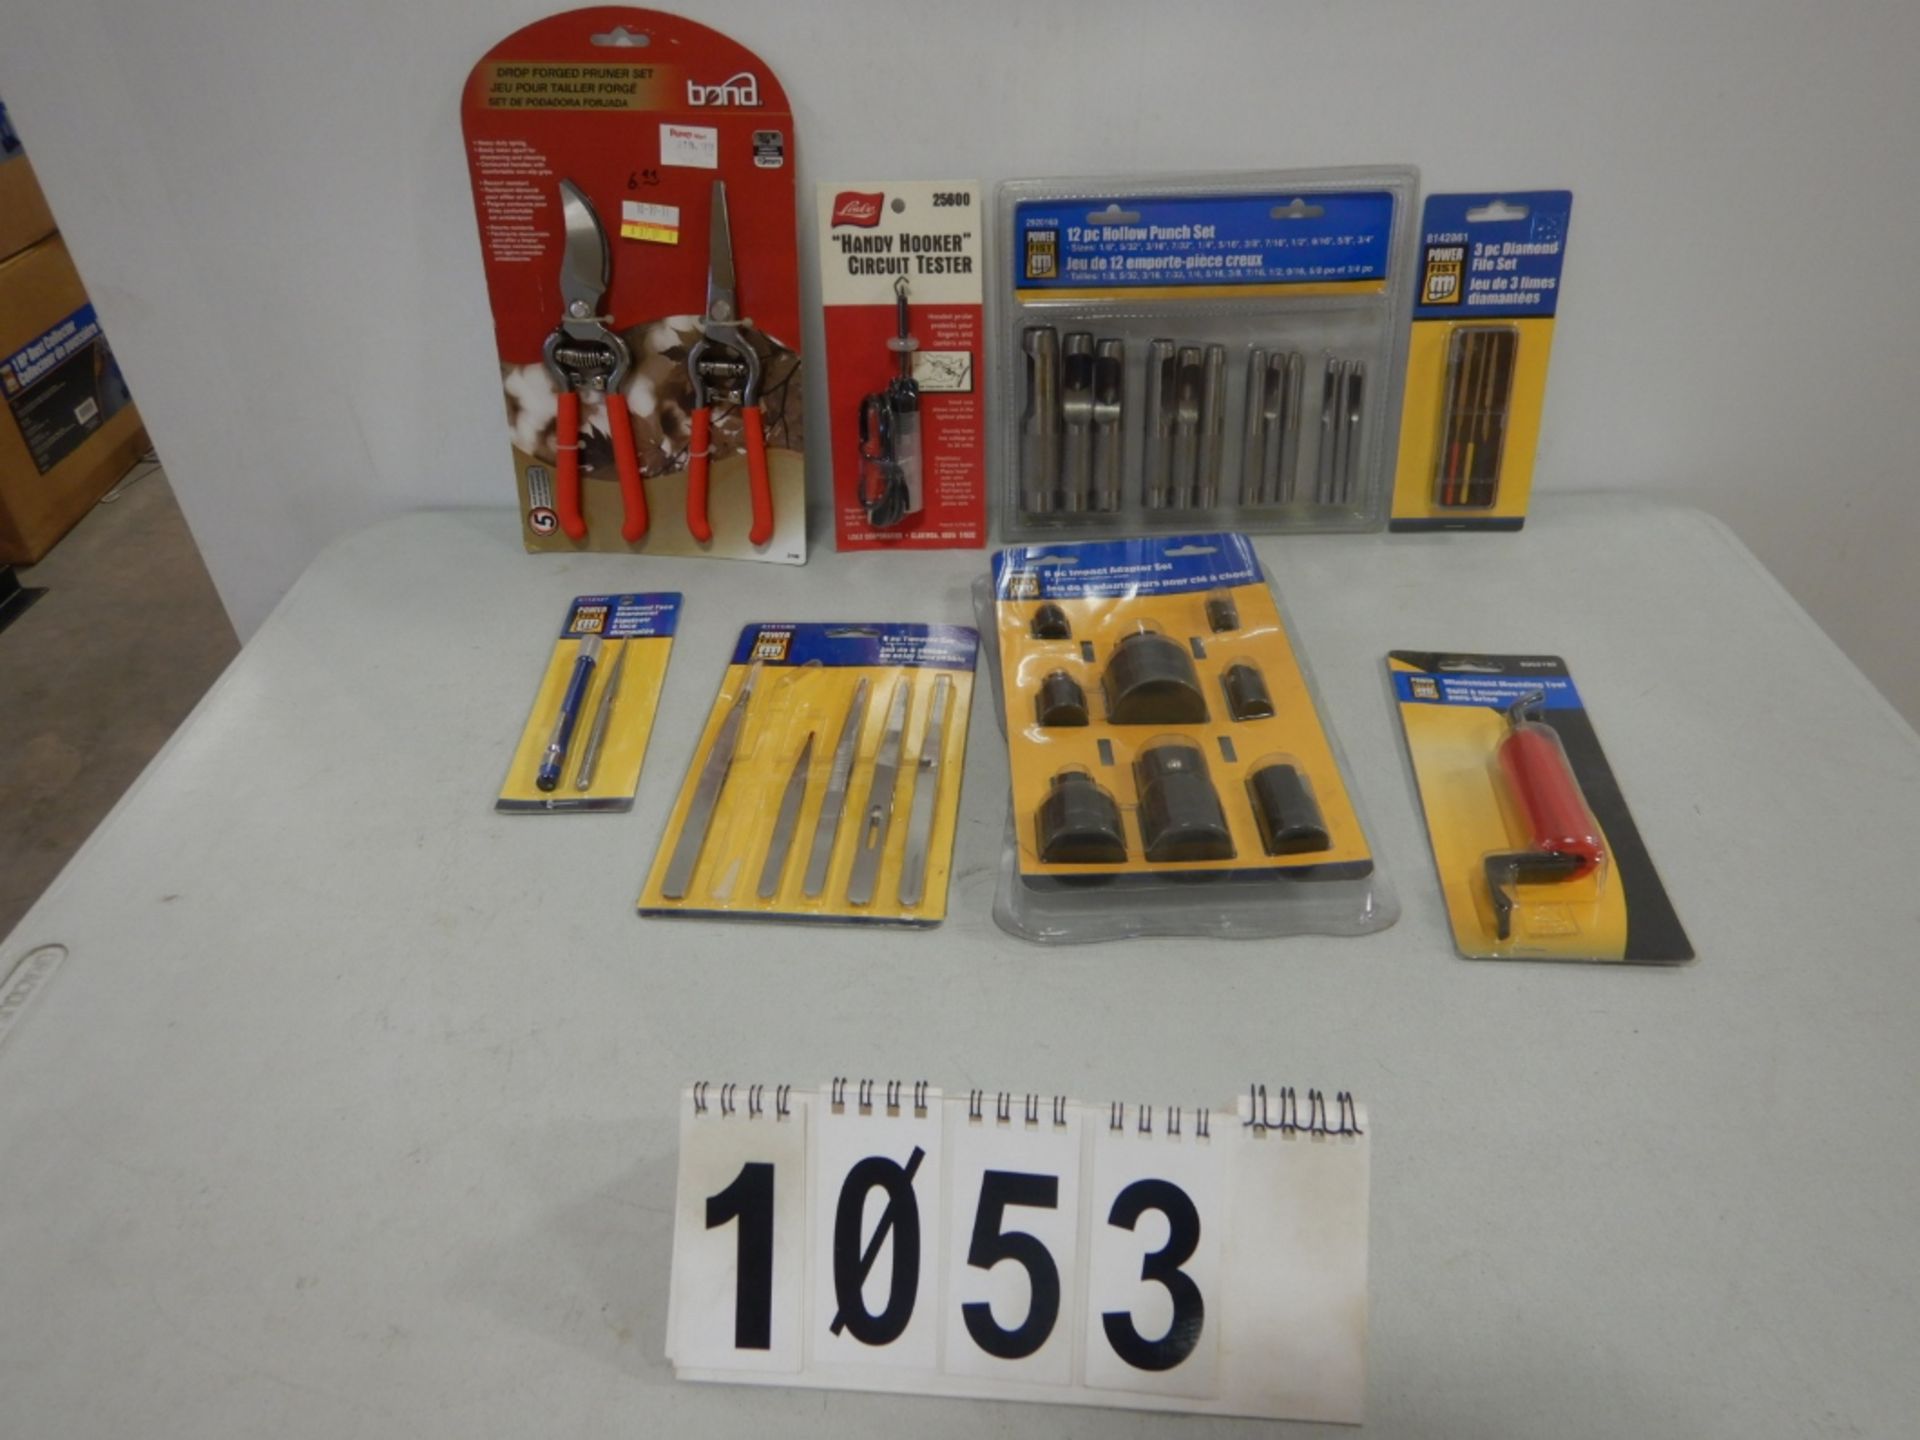 HOLLOW POINT PUNCH SET, PRUNING SHEARS, CIRCUIT TESTER, & ASSORTED TOOLS, ETC.